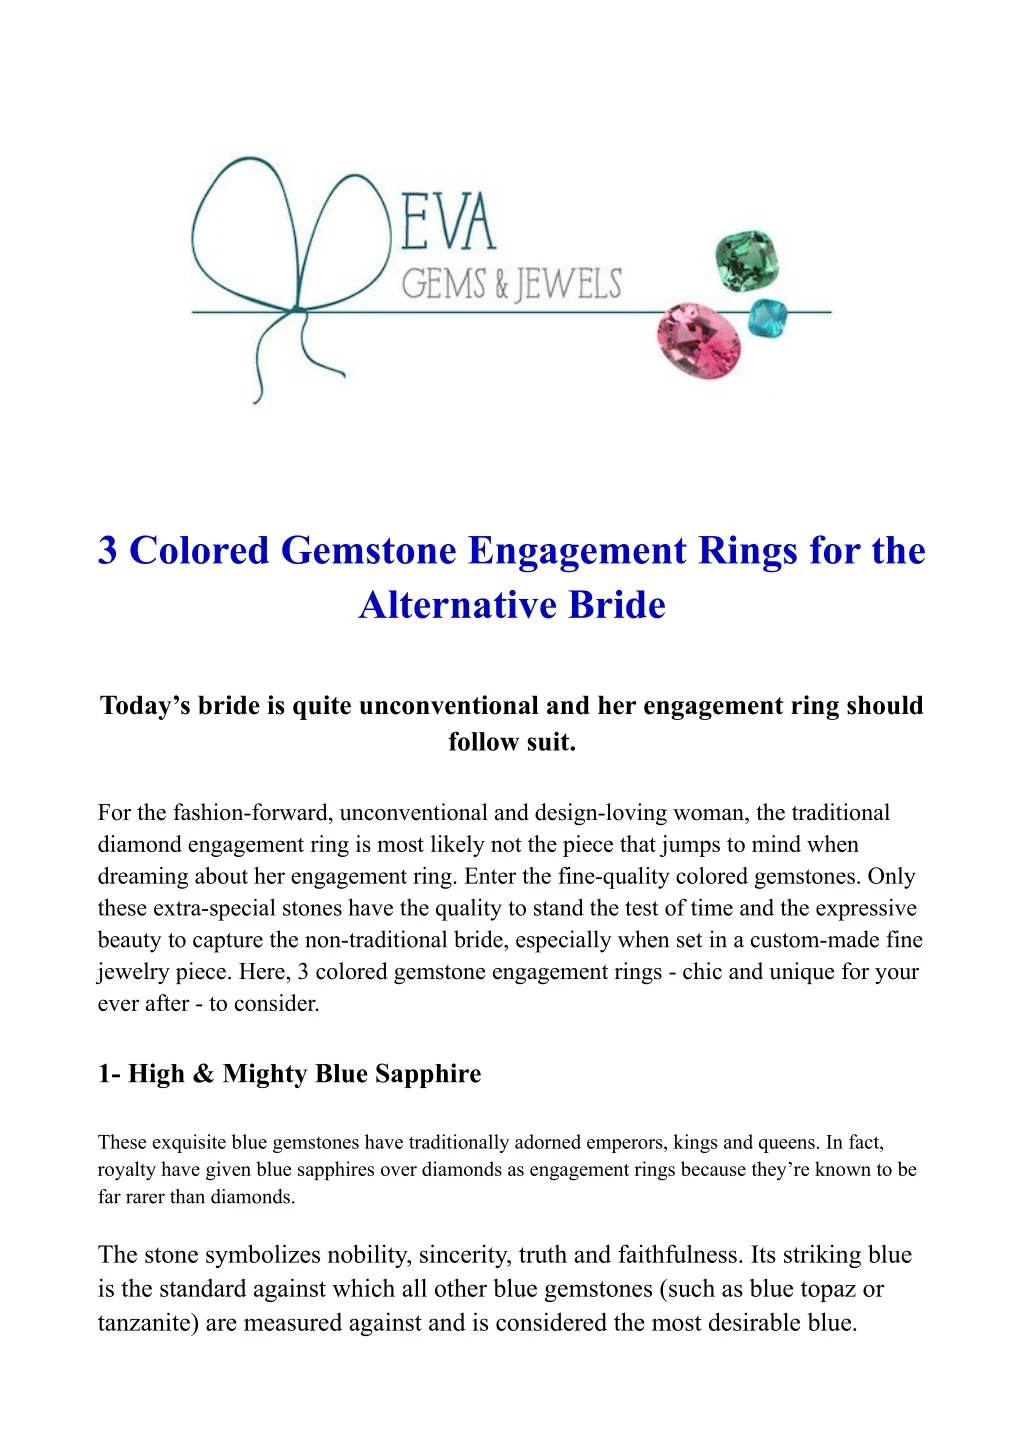 3 colored gemstone engagement rings